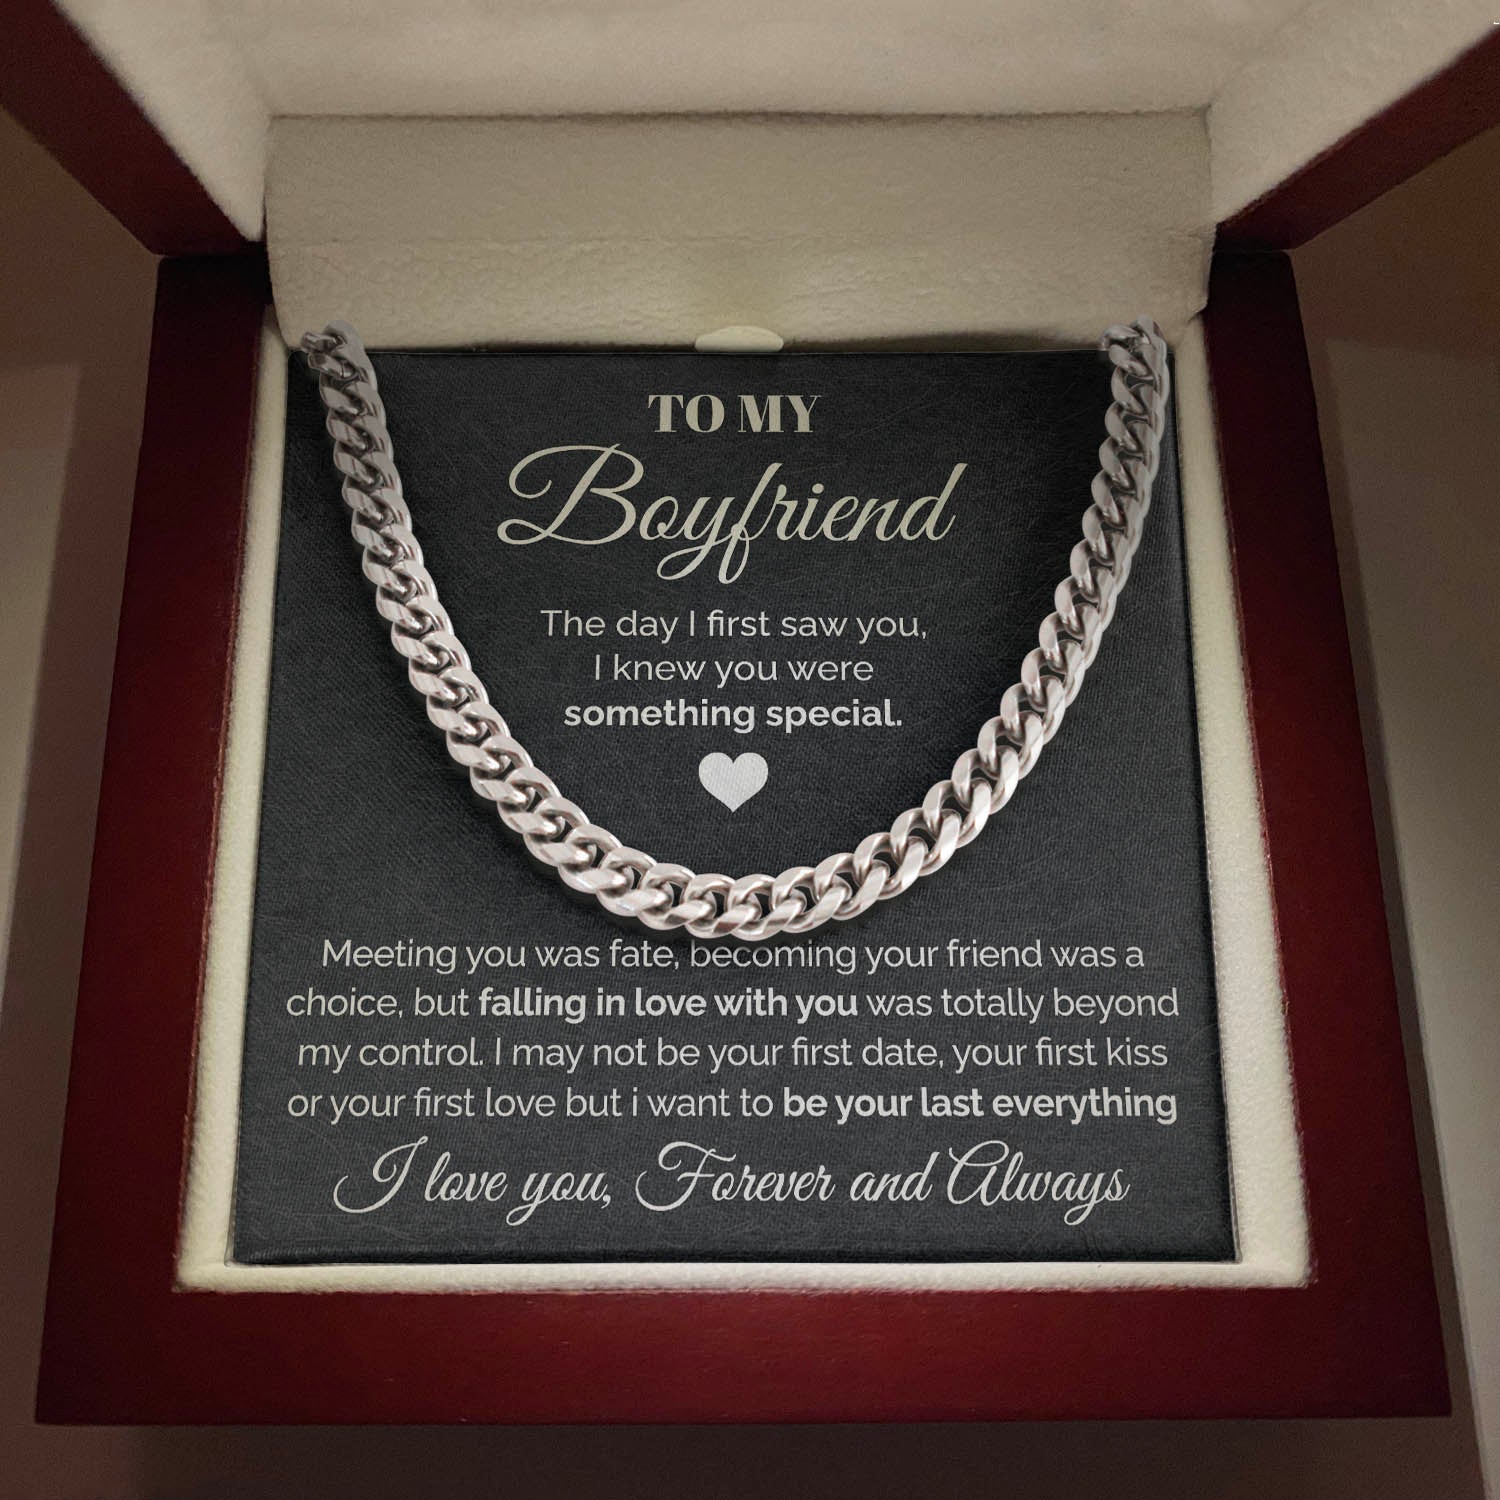 ShineOn Fulfillment Jewelry Stainless Steel / Luxury Box To my Boyfriend - Meeting you was fate - Cuban Link Chain